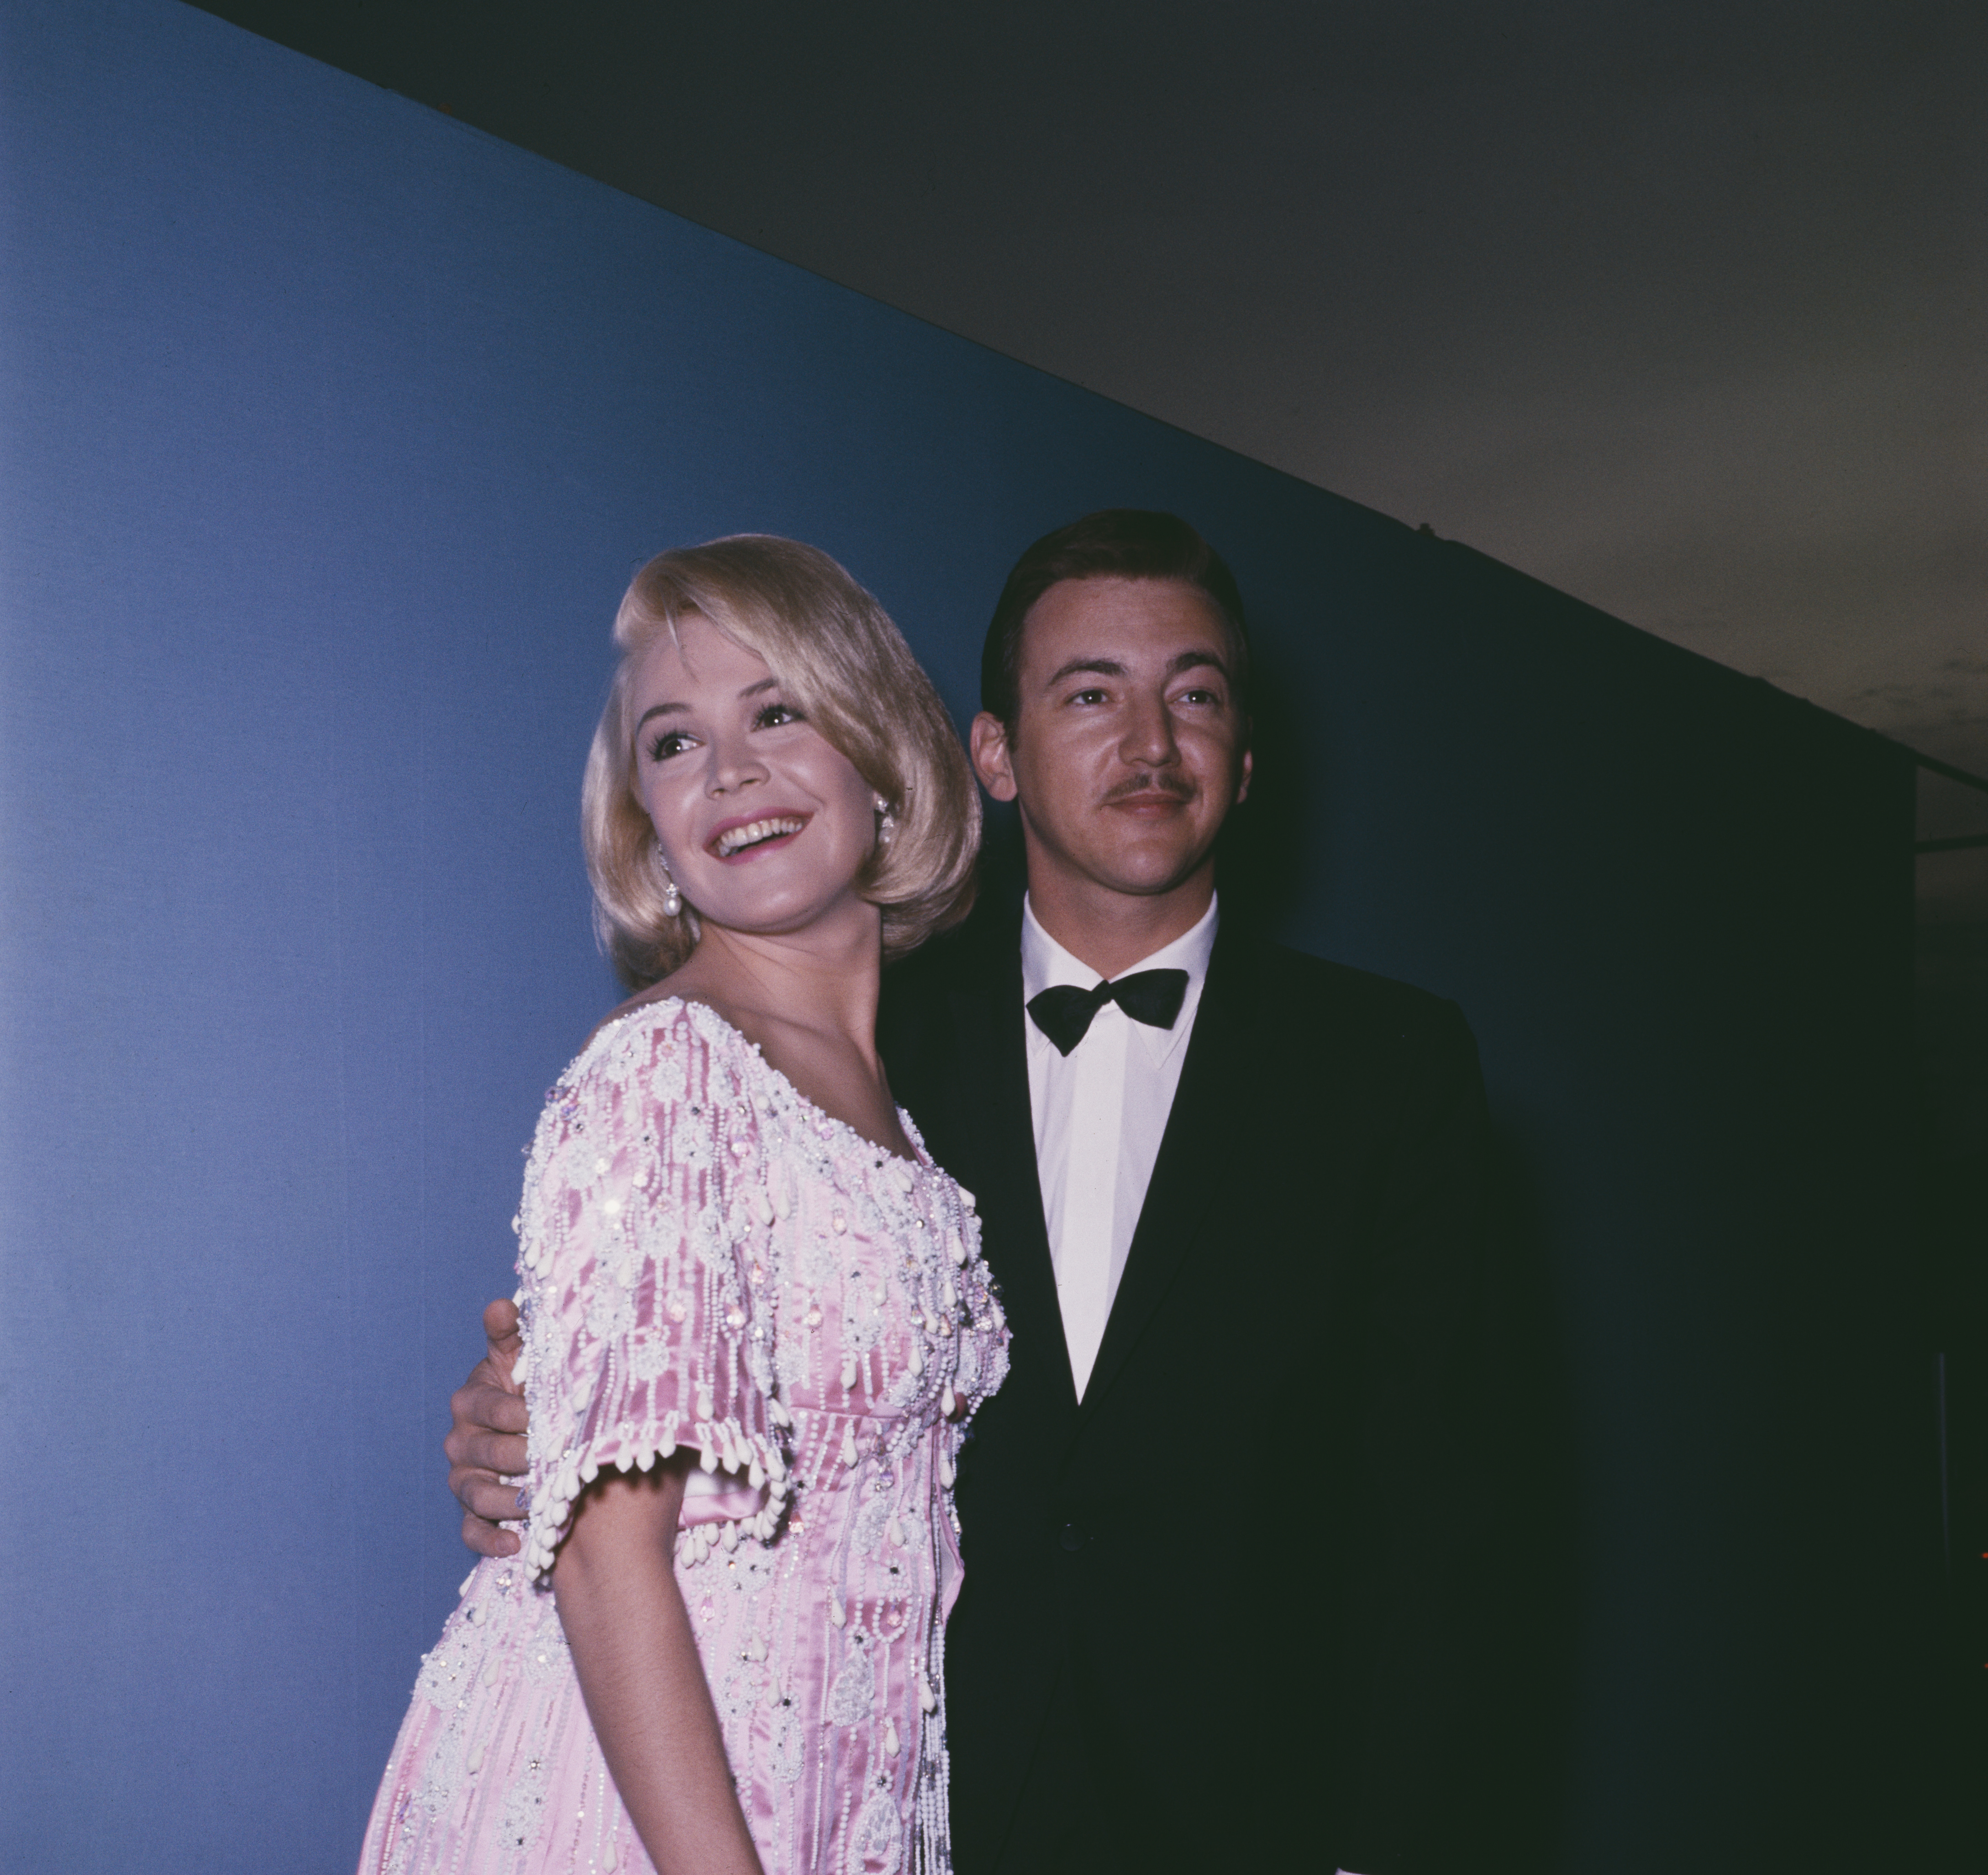 Sandra Dee and Bobby Darin at the Oscars in Santa Monica in 1965 | Source: Getty Images